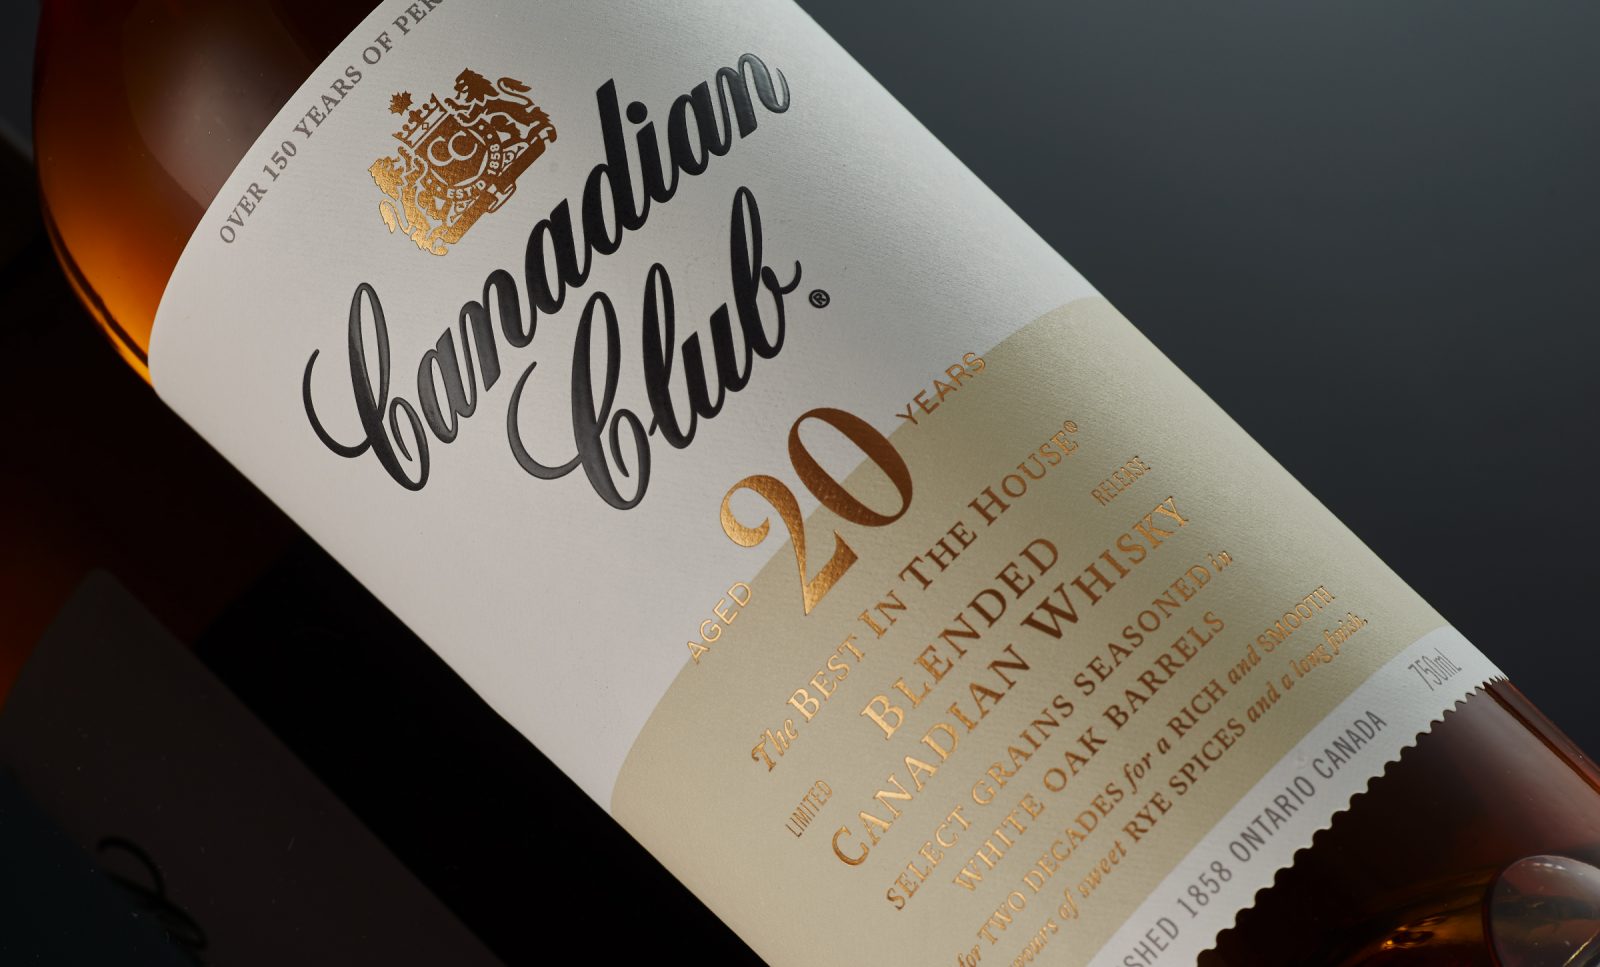 Canadian Club Whisky Re-Branding